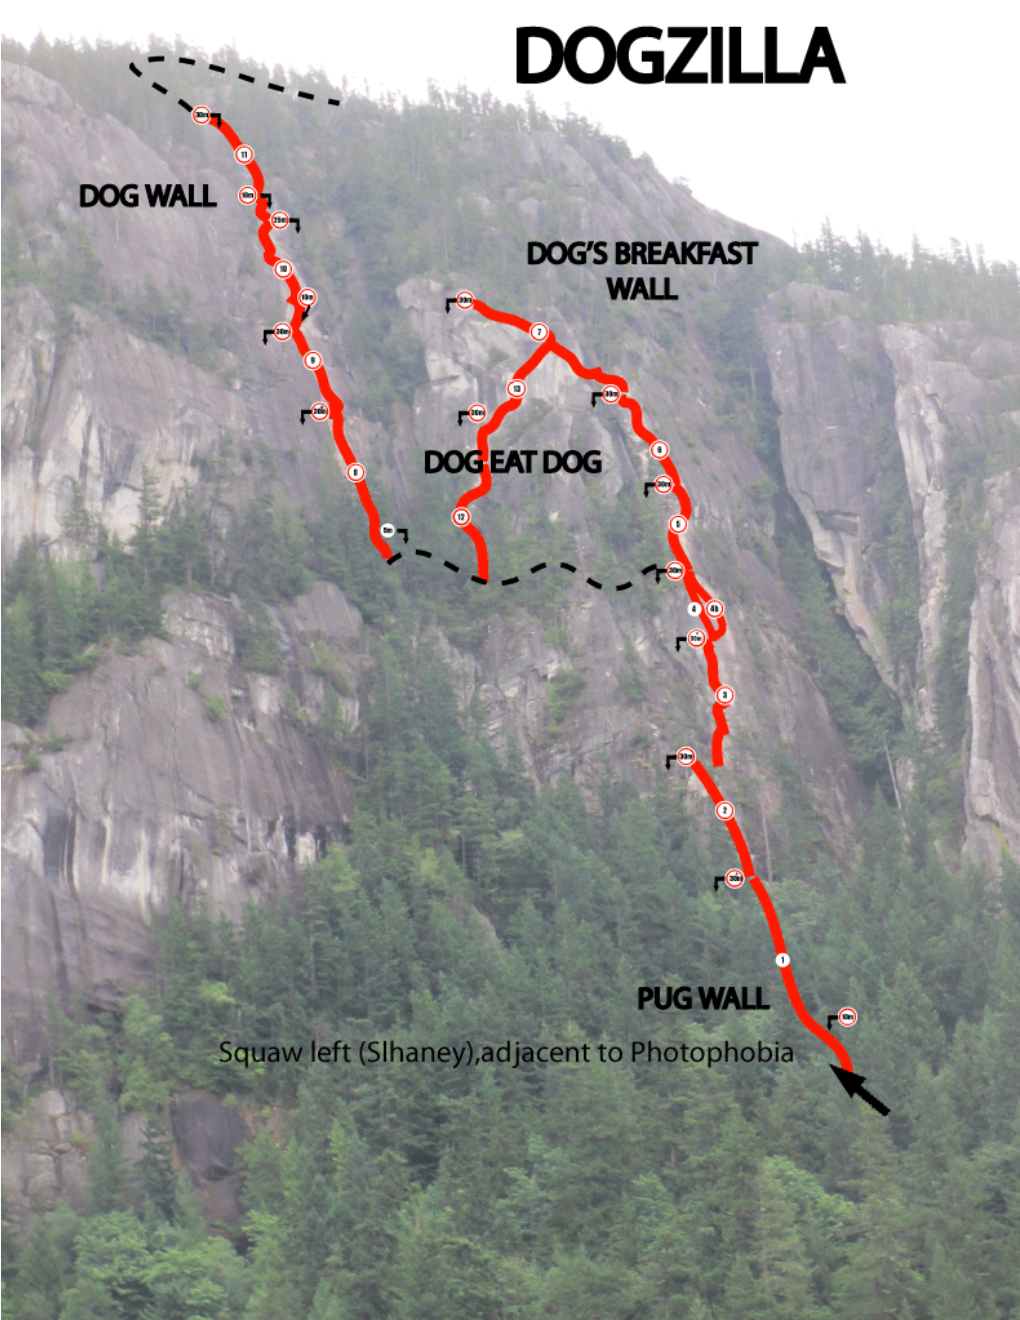 Dogzilla This New Route Has Climbing up to 5.11B and Is a Semi-Continuous Multi-Pitch Circuit of up to 14 Pitches